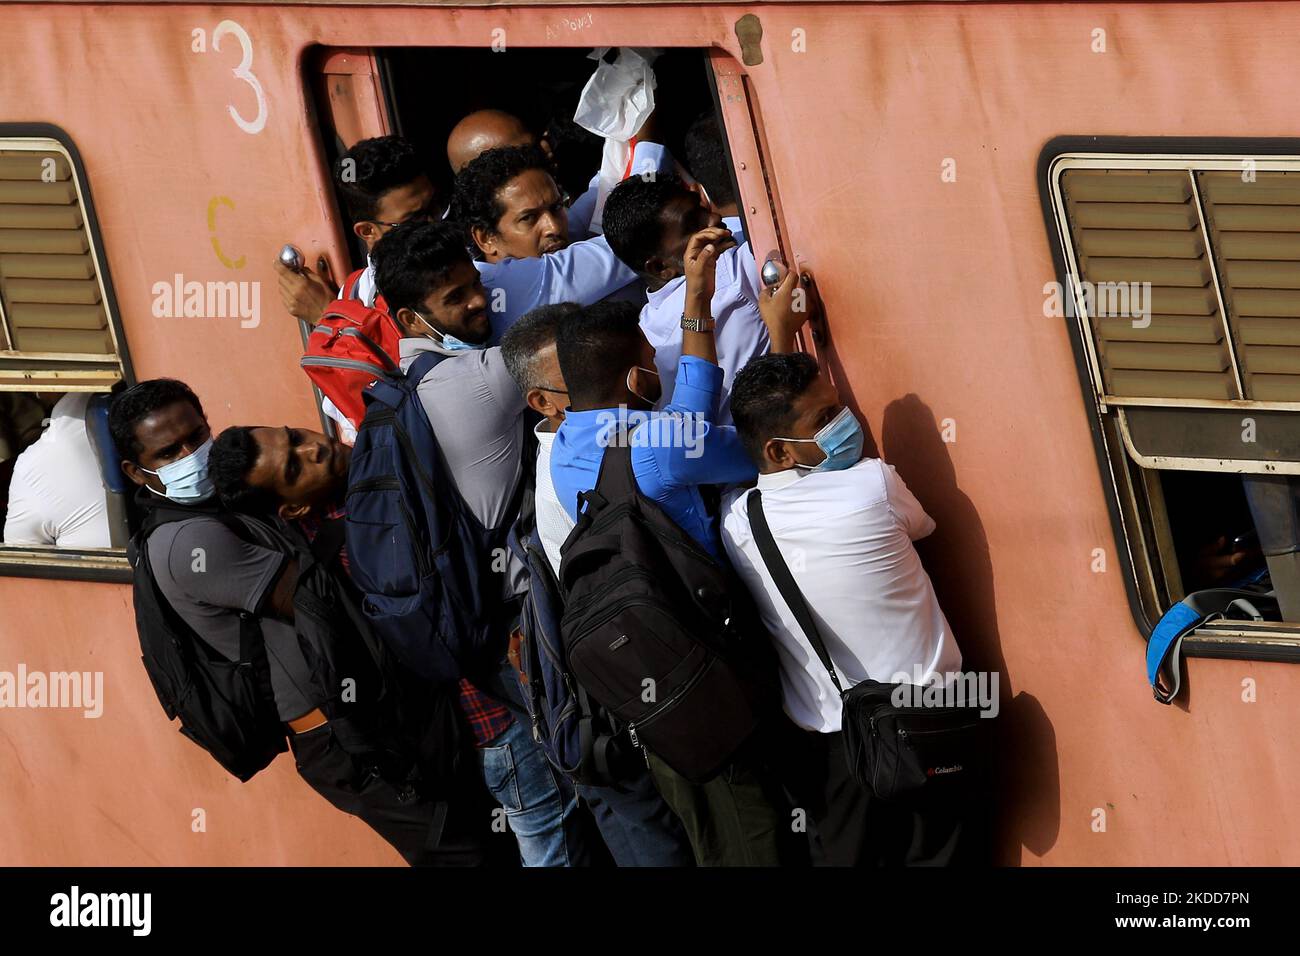 Sri Lankans commute in an over-crowded train at Colombo, Sri Lanka. 6 July 2022. Sri Lanka has less than a dayâ€™s worth of fuel left, the energy minister said, with public transport grinding to a halt as the countryâ€™s economic crisis deepens. (Photo by Tharaka Basnayaka/NurPhoto) Stock Photo